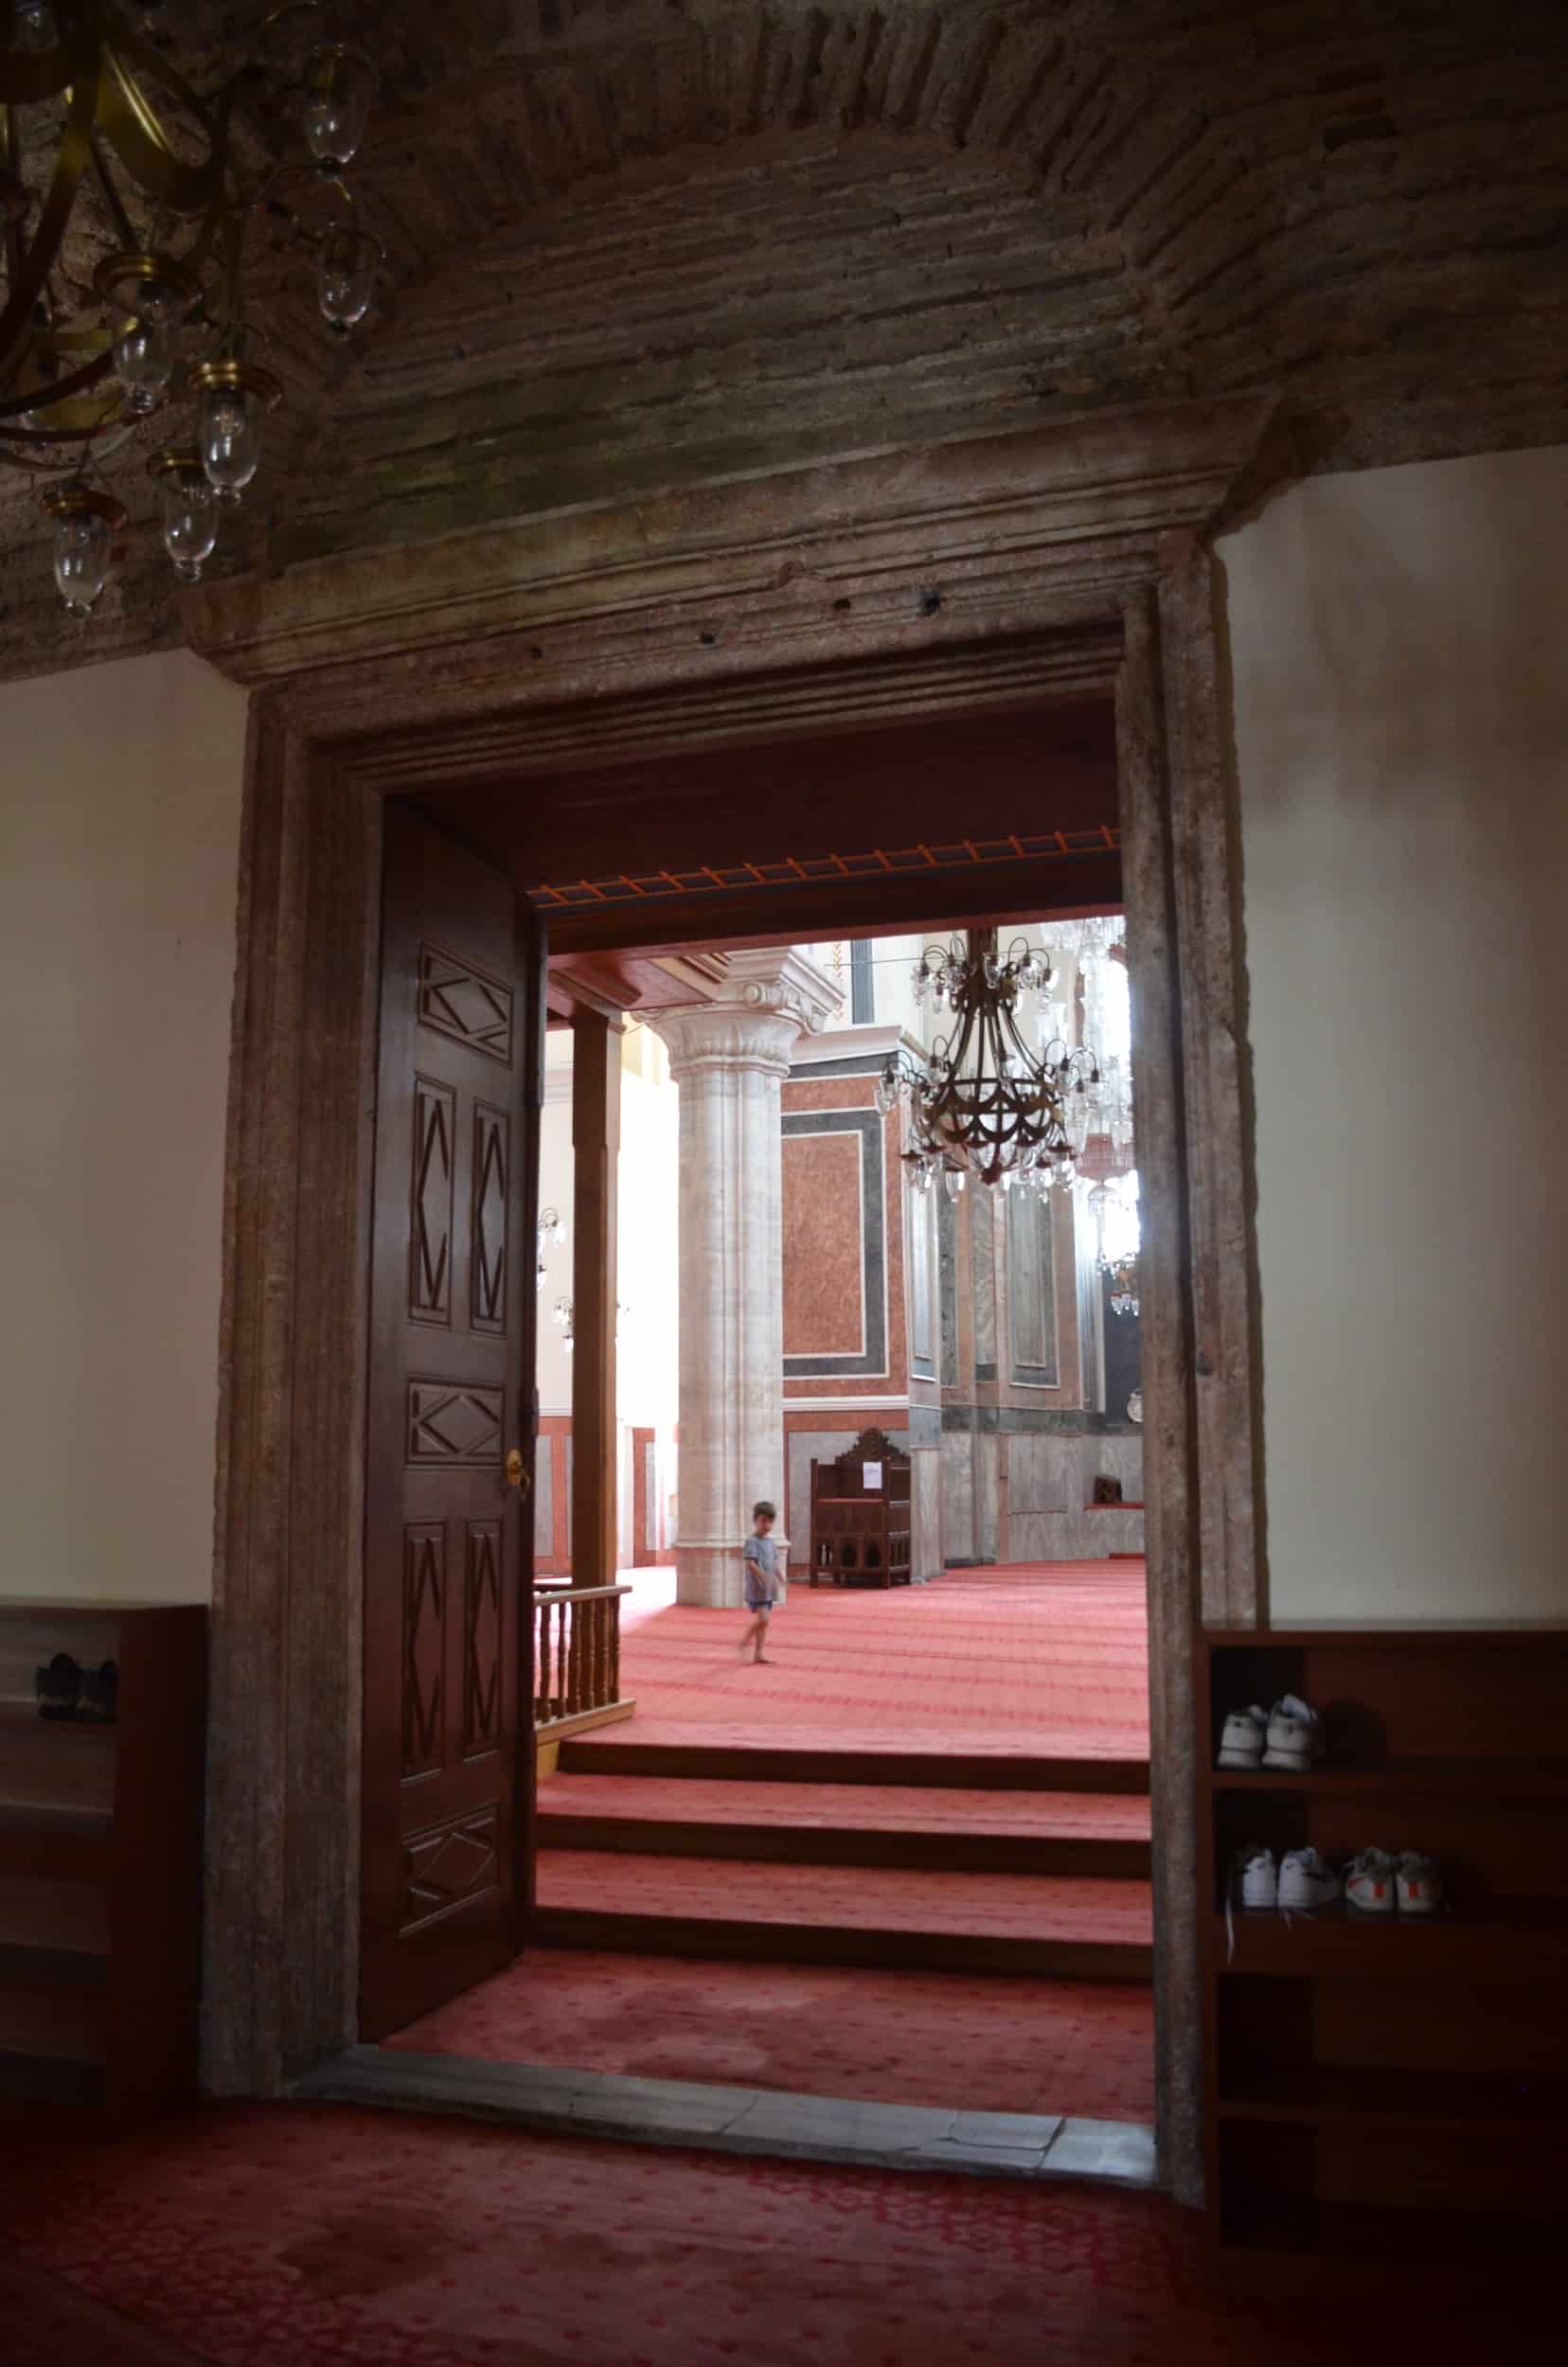 Main door to the south church in the narthex of the Zeyrek Mosque in Zeyrek, Istanbul, Turkey